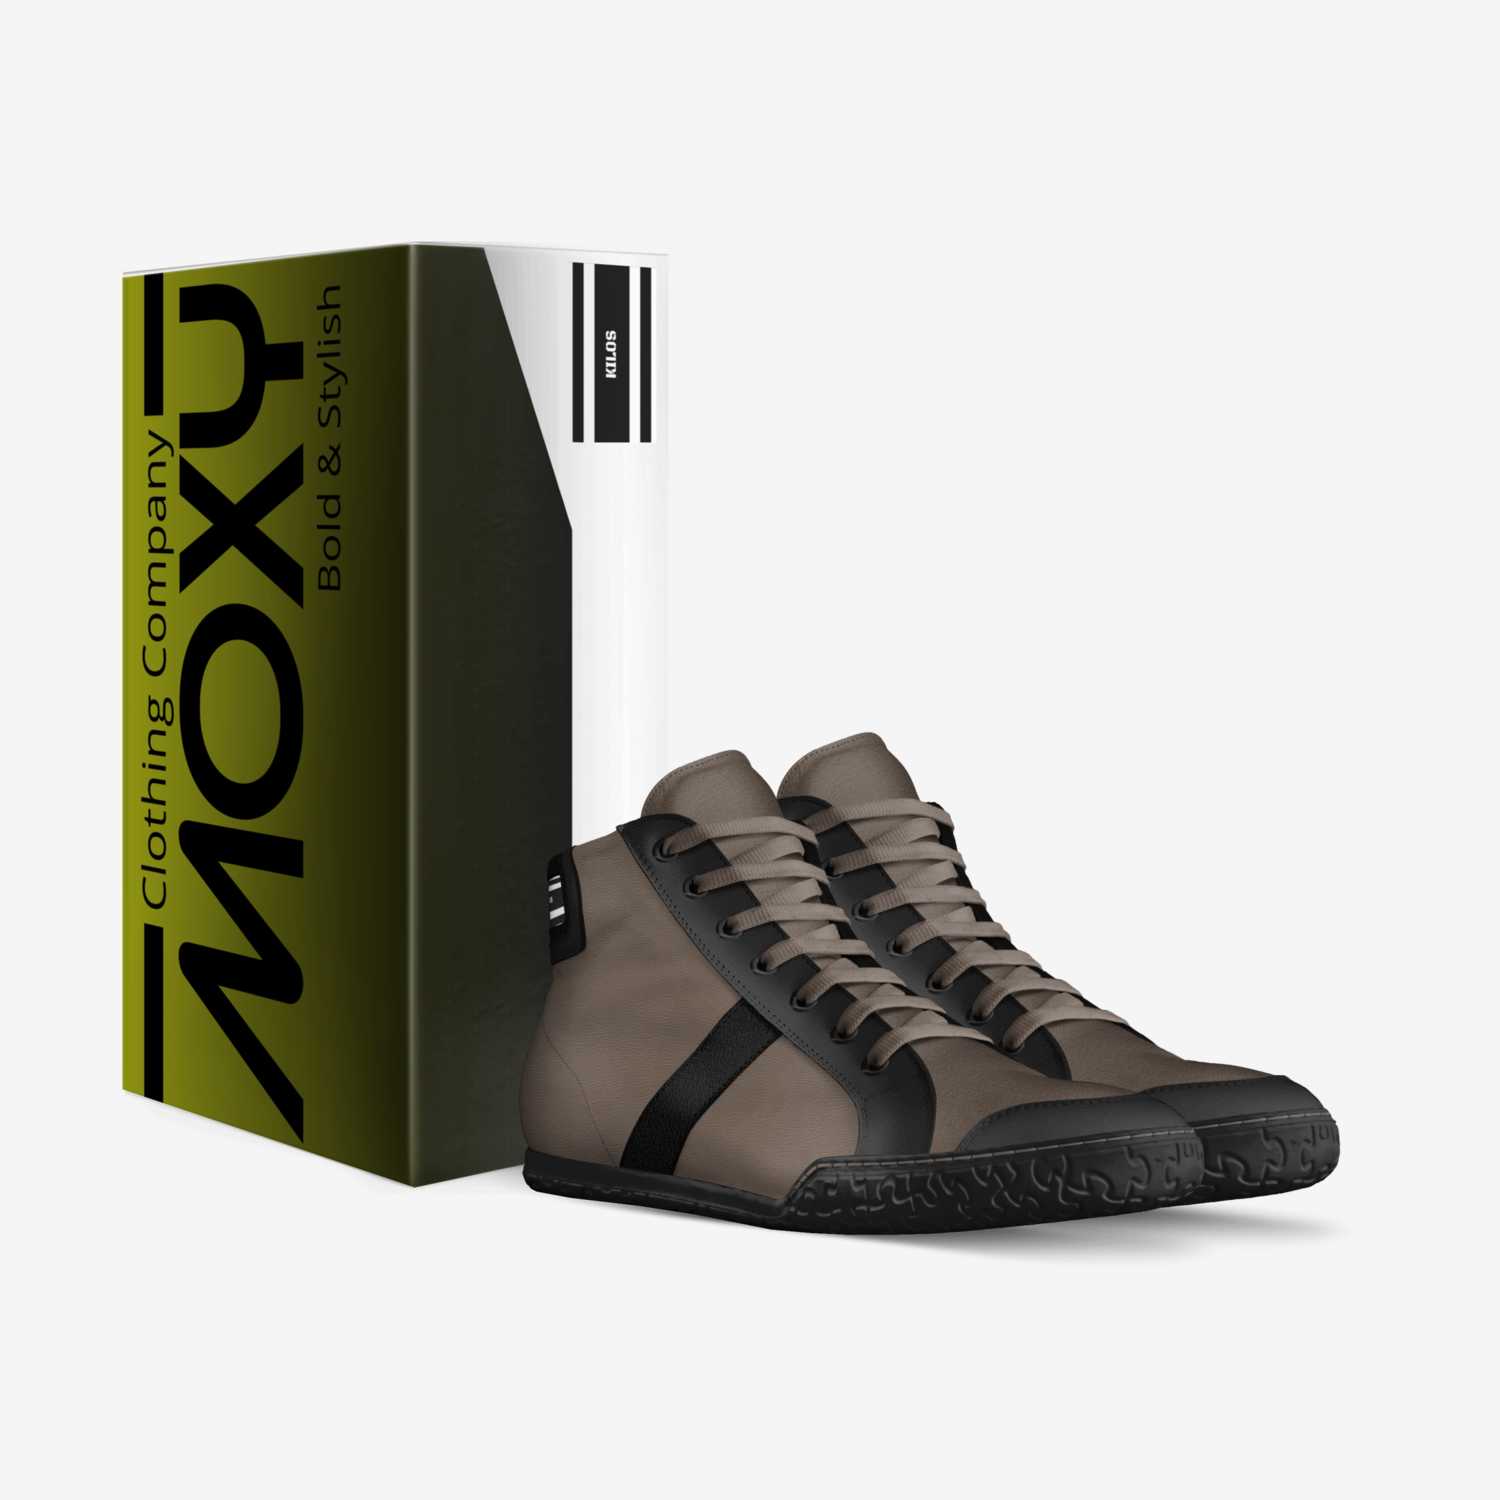 KILOS custom made in Italy shoes by Moxy Clothing Co. | Box view